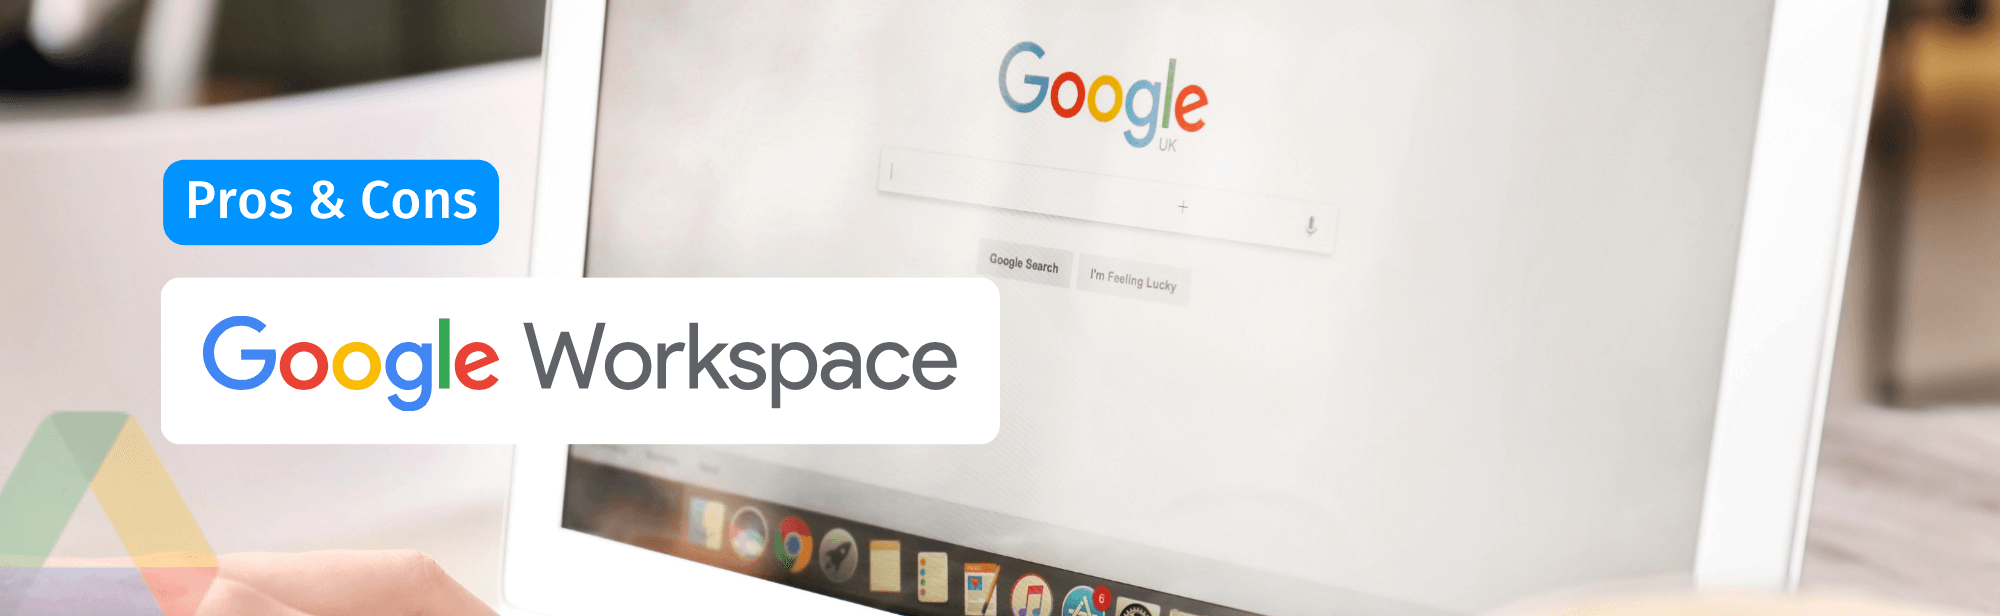 Hosting Email on Google: Google Workspace Pros & Cons